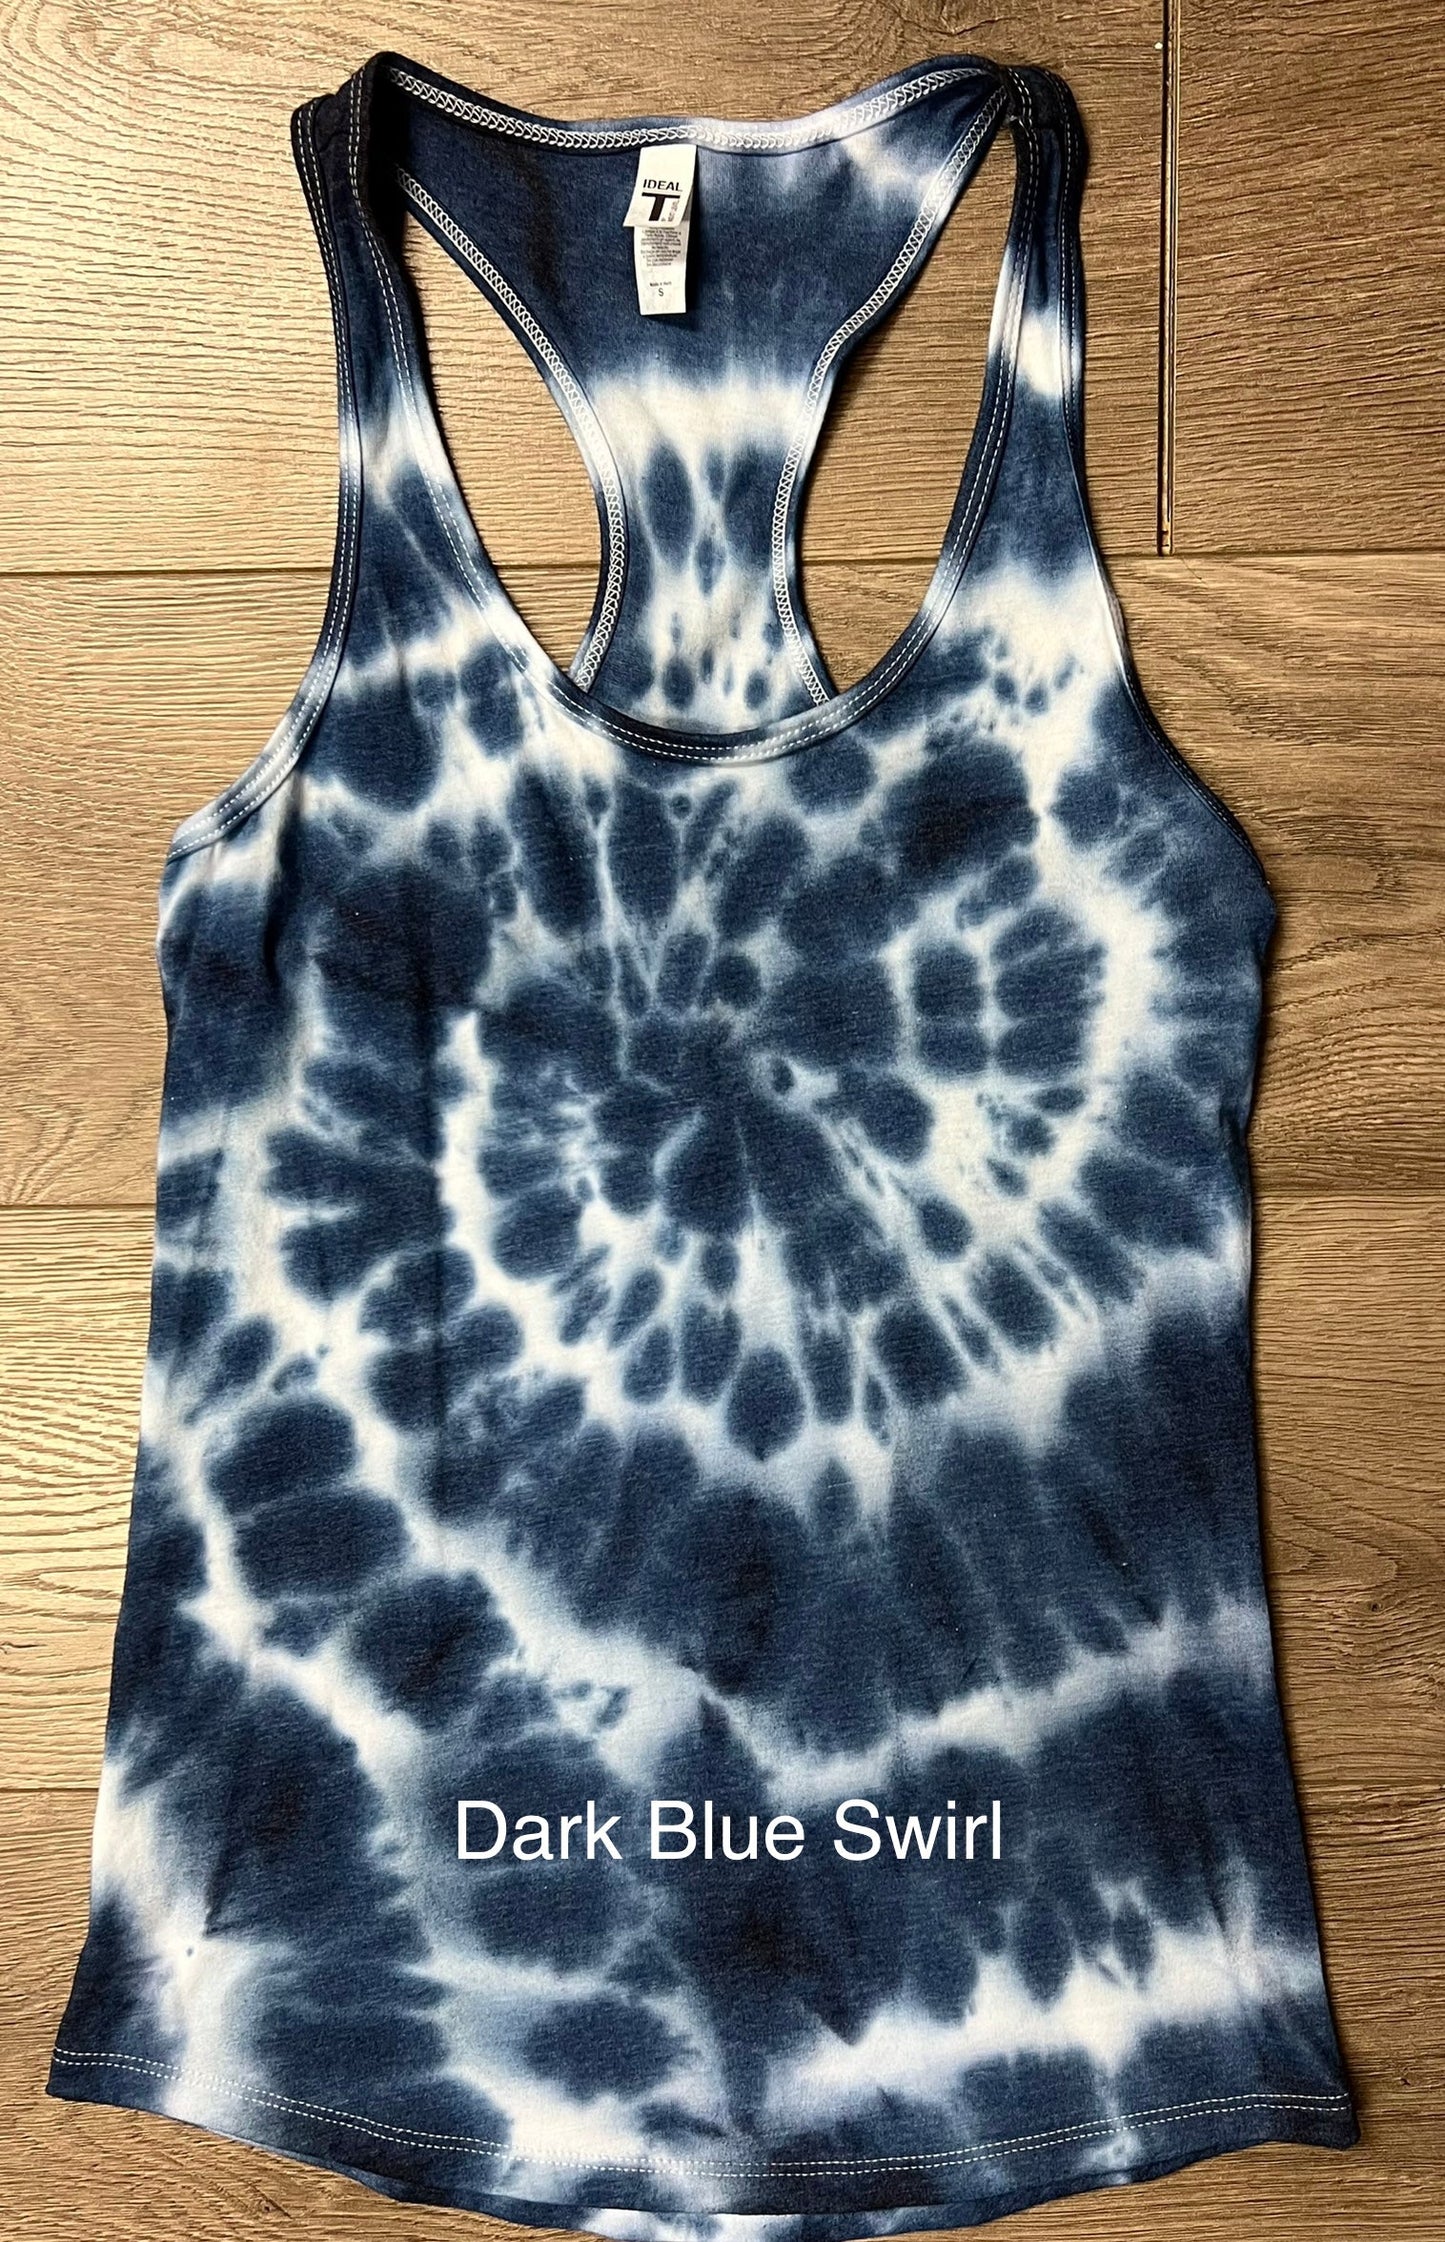 Hand-dyed Adult Cancer Ribbon Front/Back Long-Sleeve T-shirt - CHOOSE TIE DYE COLORS